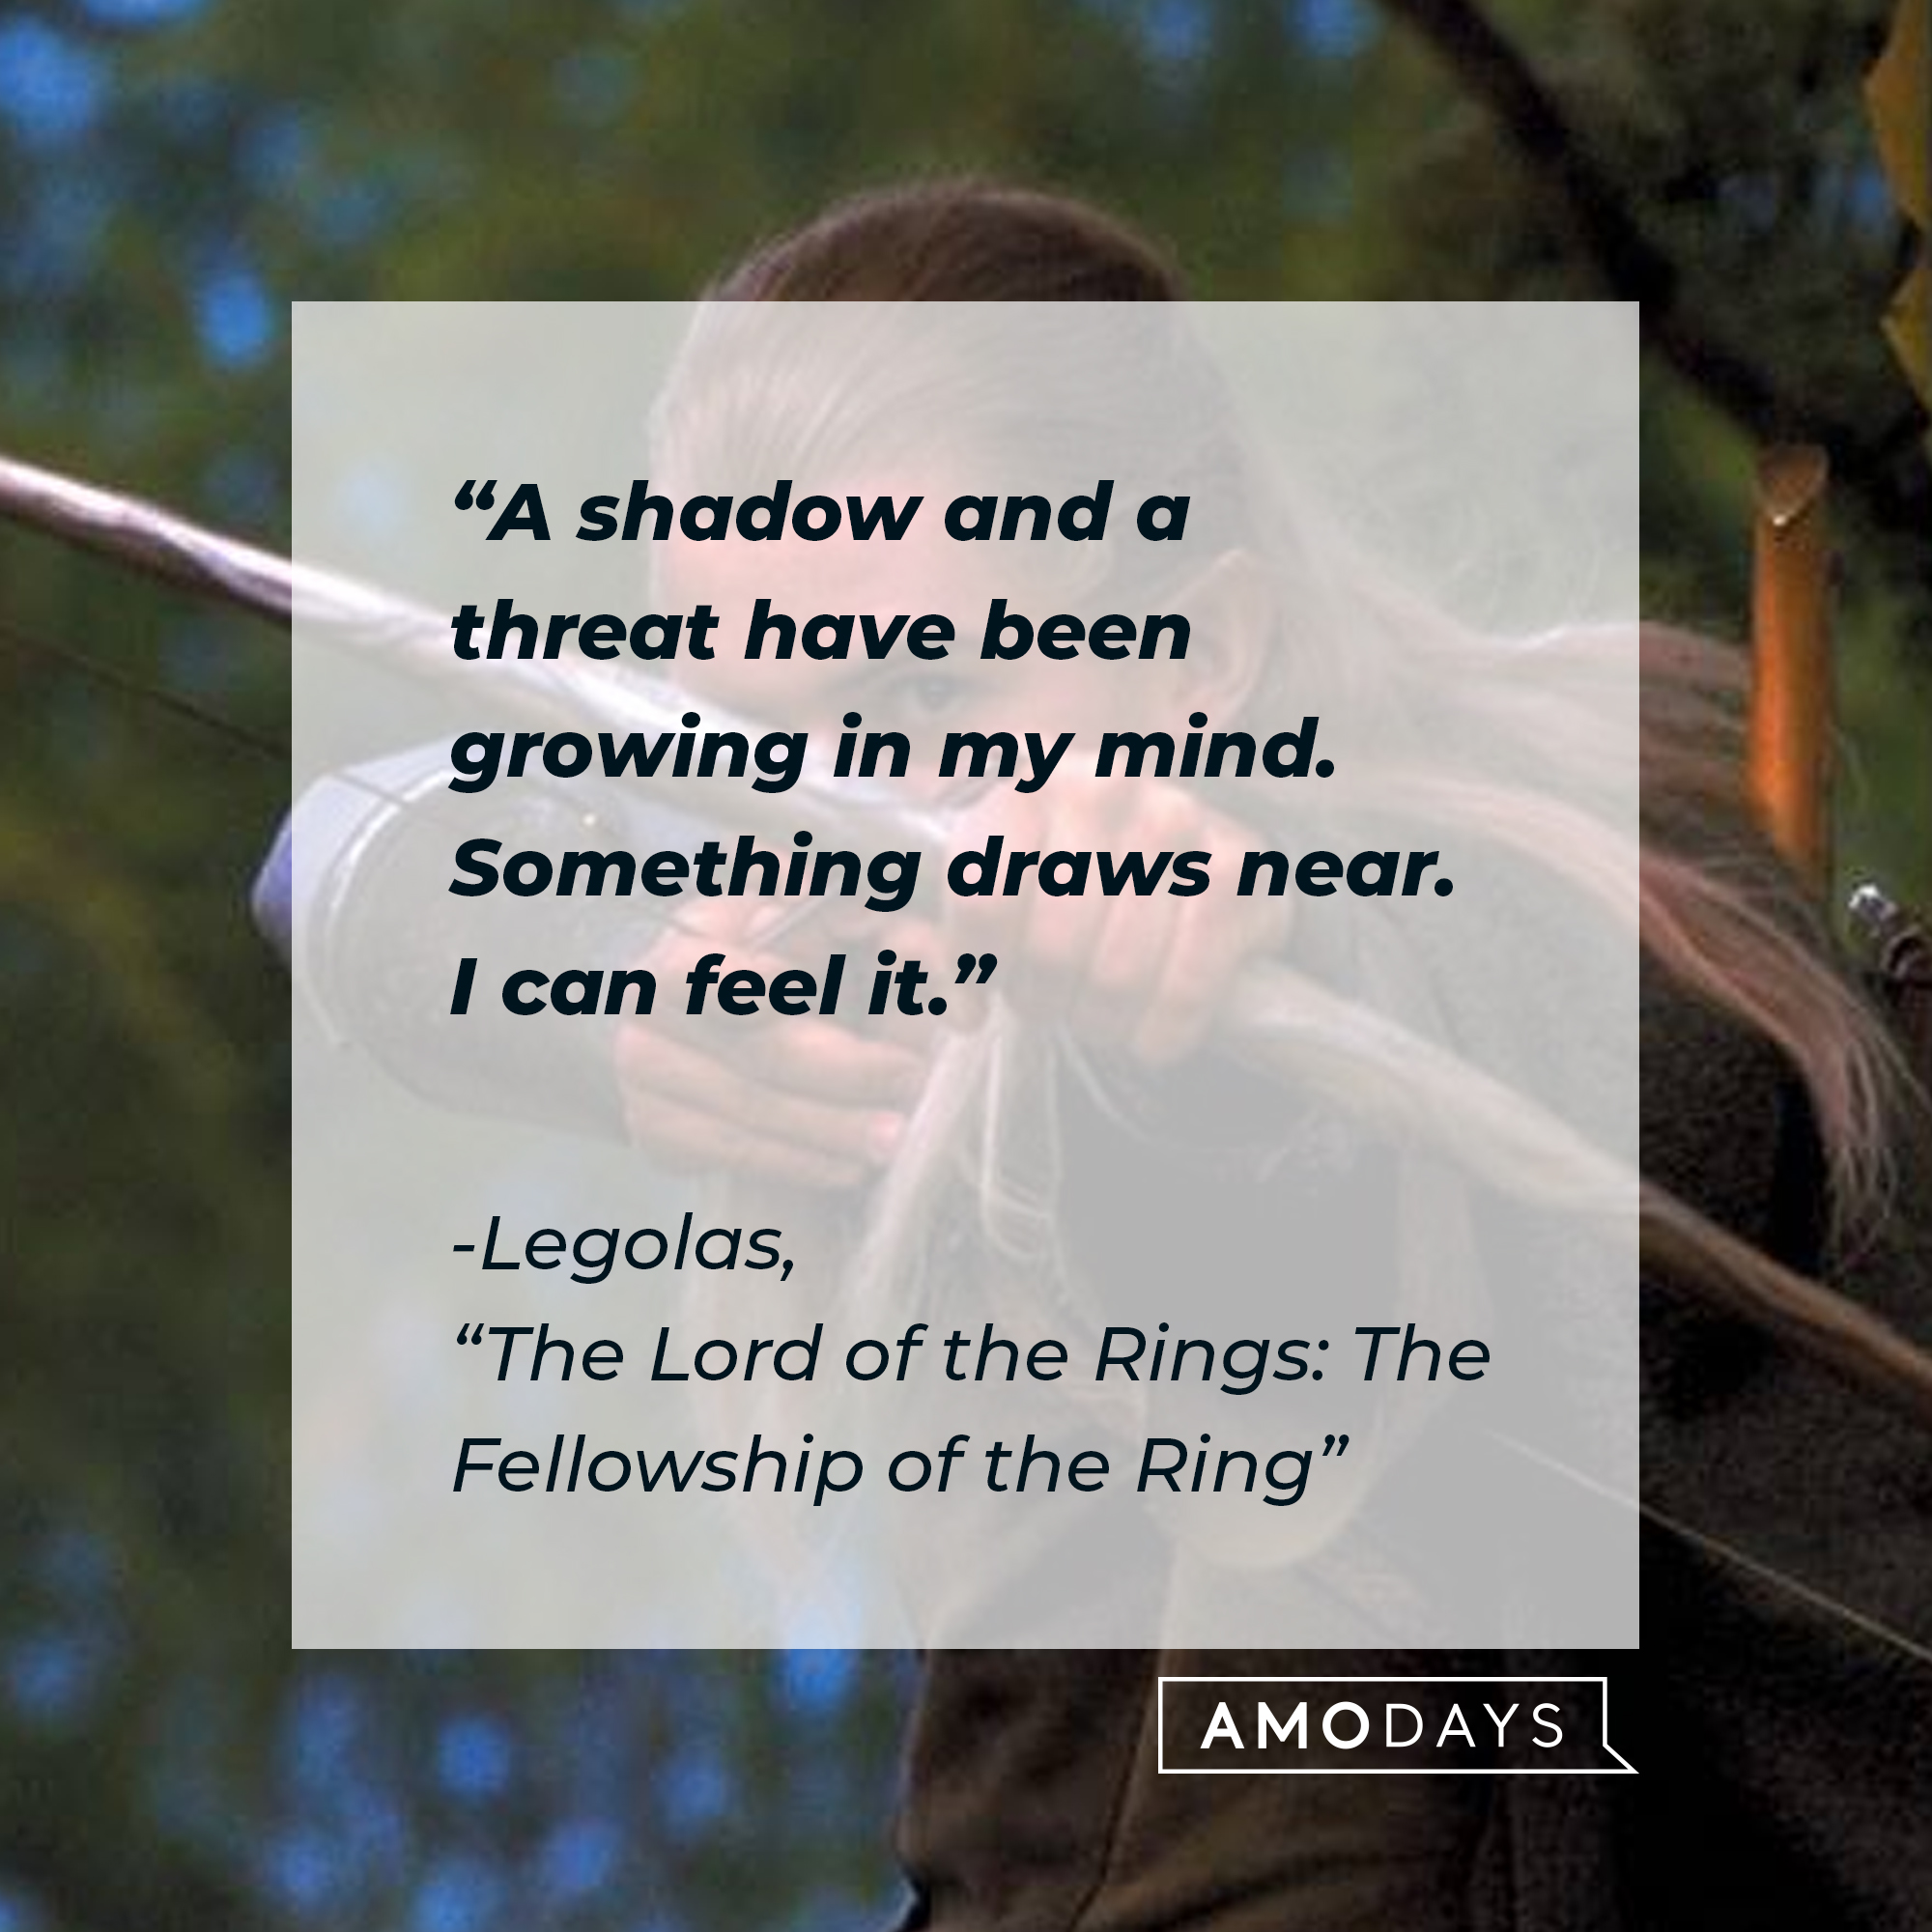 Legolas with his quote: "A shadow and a threat have been growing in my mind. Something draws near. I can feel it."  | Source: Facebook.com/lordoftheringstrilogy